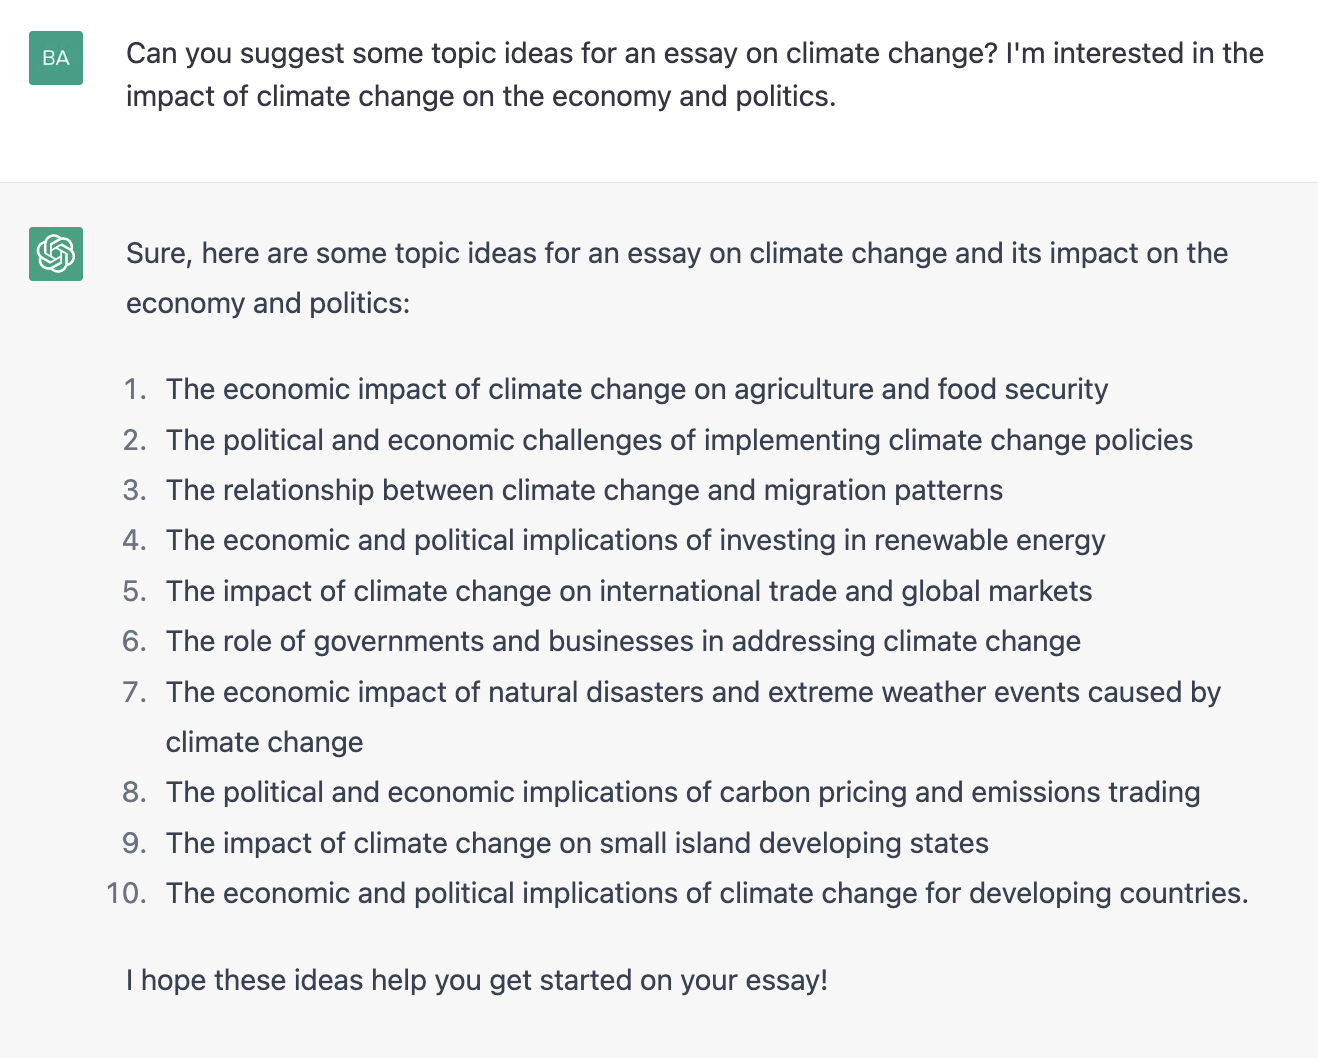 ChatGPT prompt for topic ideas for climate change